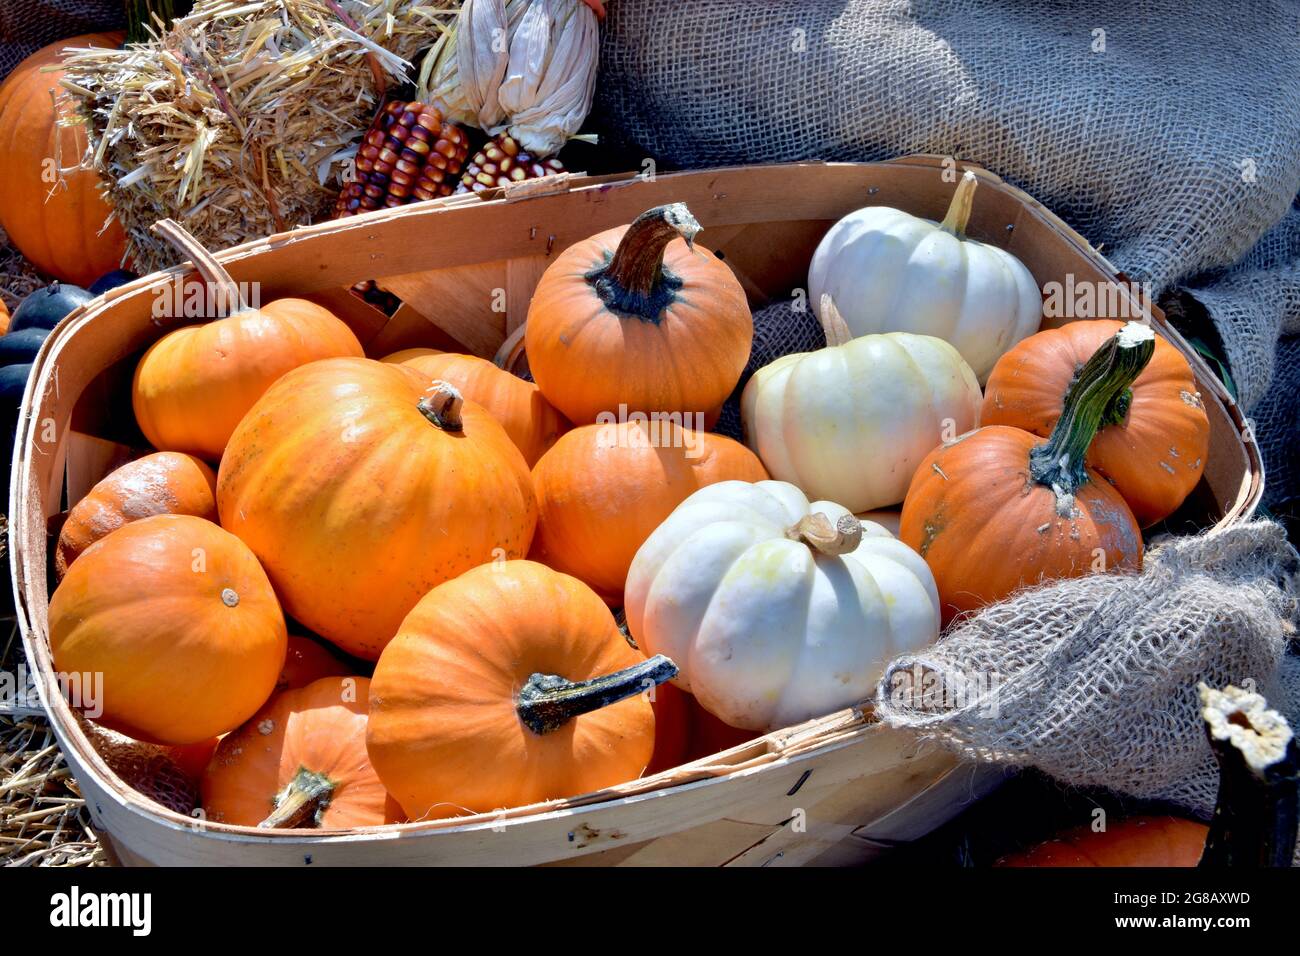 Basket of small orange and white pumpkins for sale at a roadside farm stand. Long Island, New York. Stock Photo